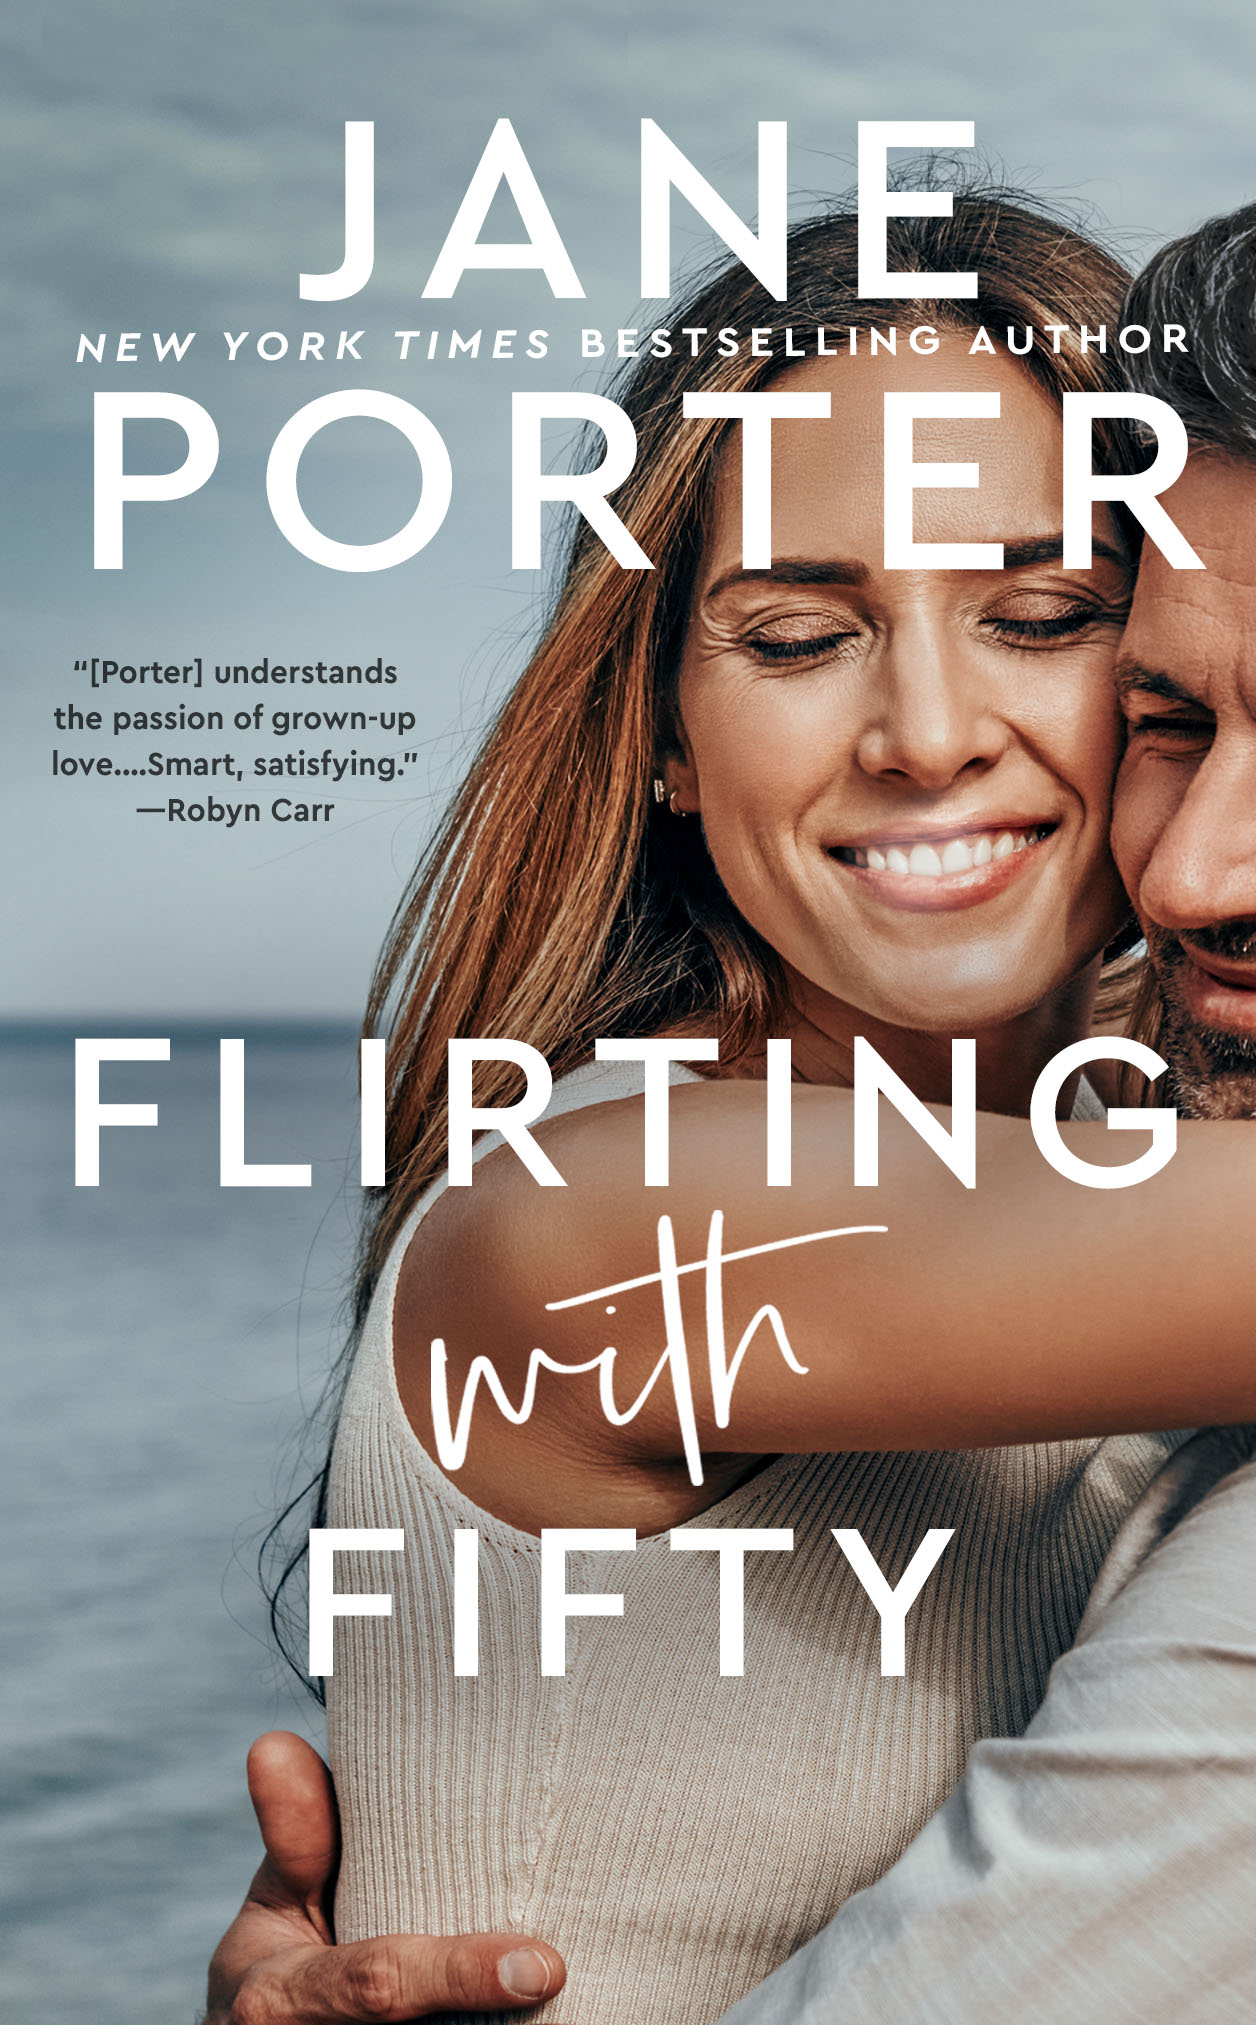 Reader’s Guide for Flirting With Fifty